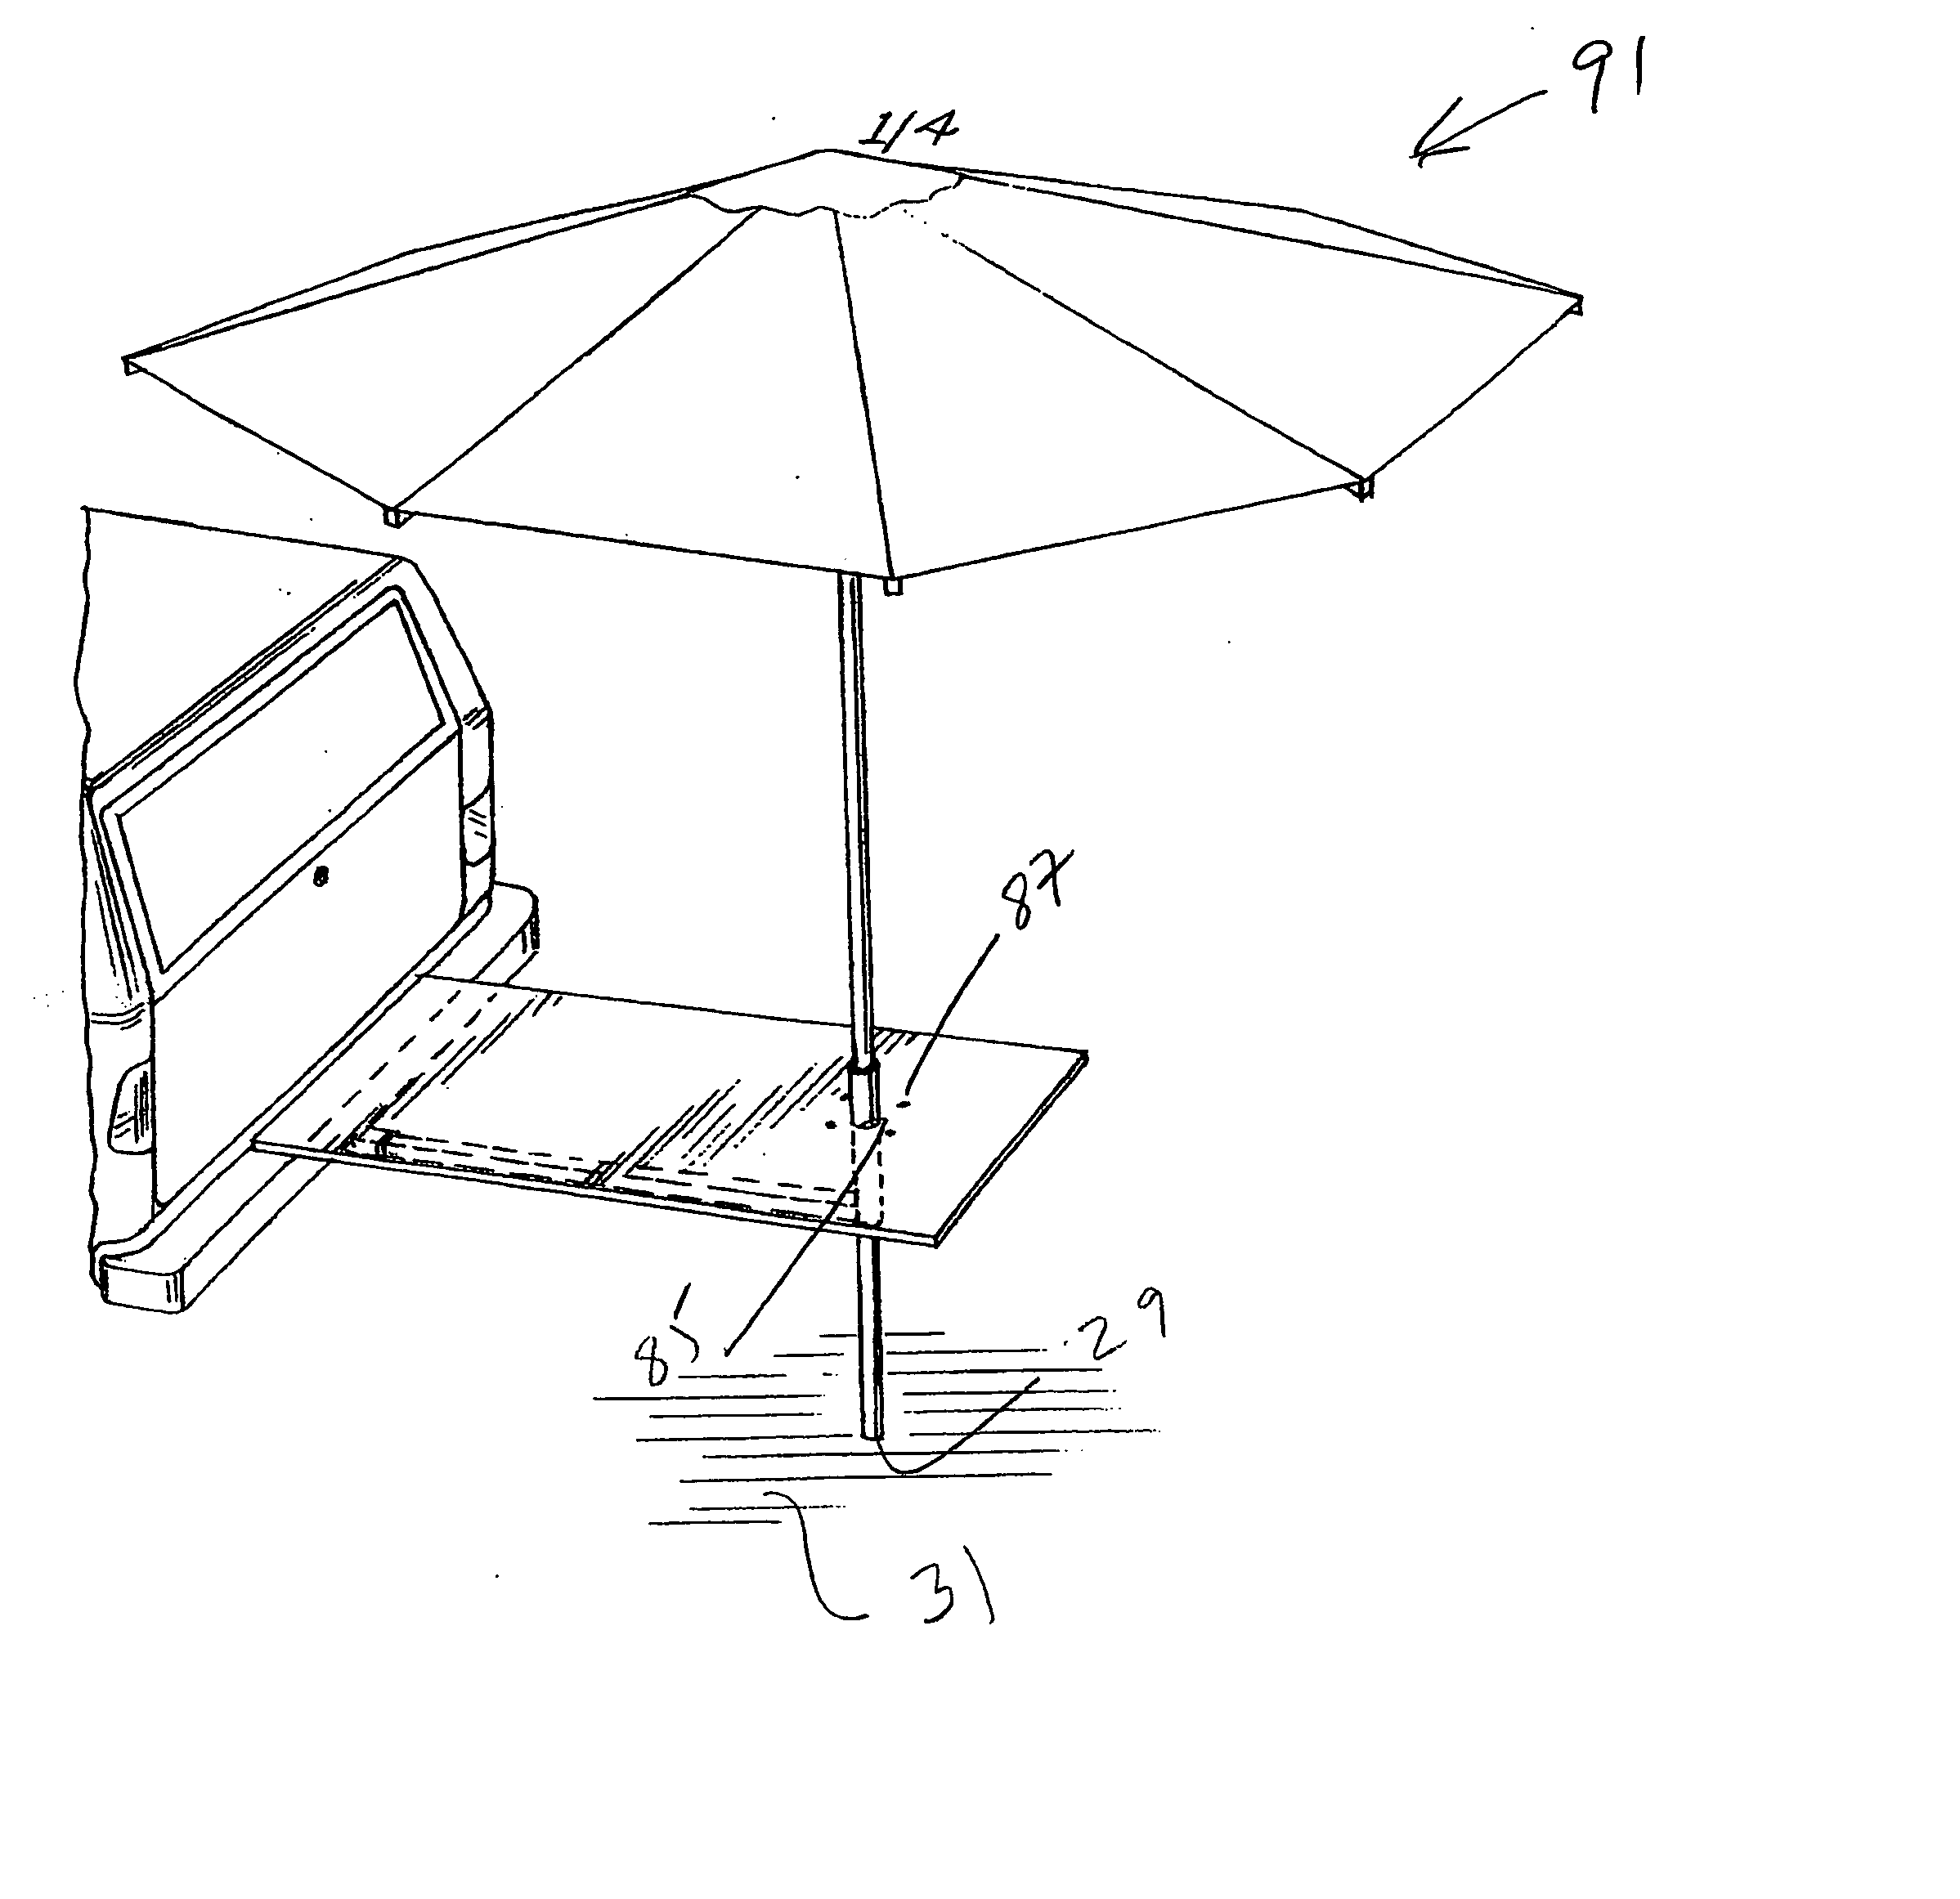 Trailer hitch mounted table and umbrella support apparatus